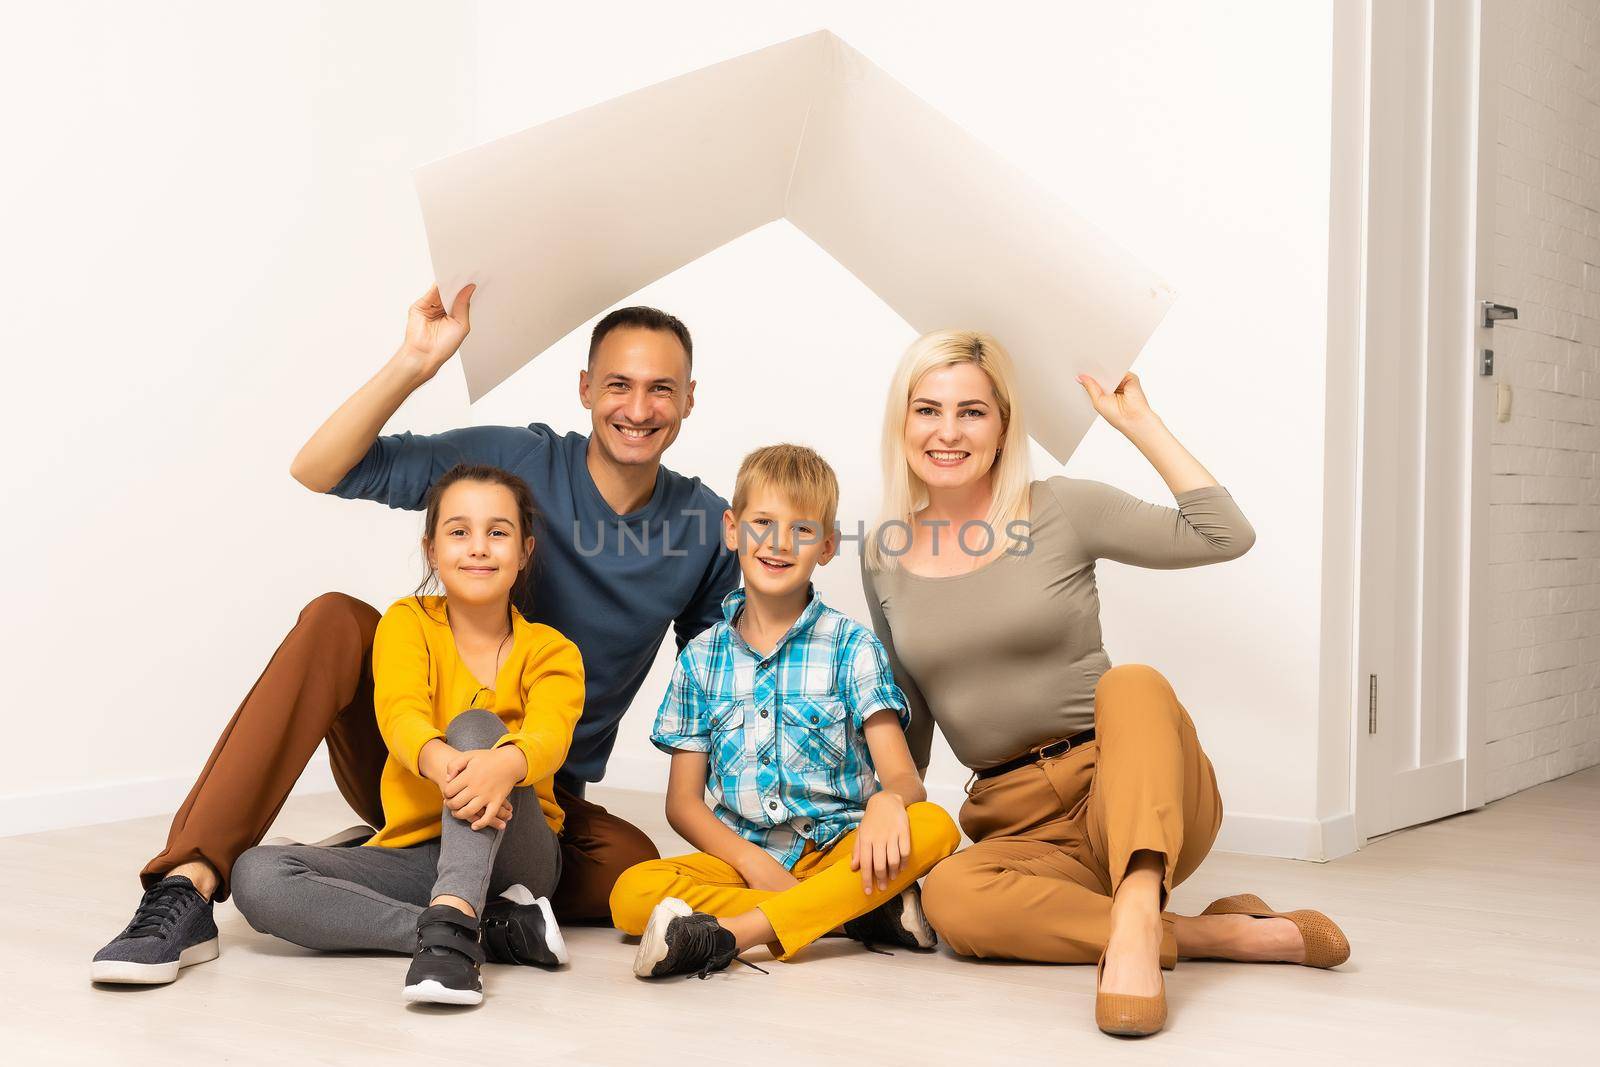 Happy family in a safe home - isolated over white background.